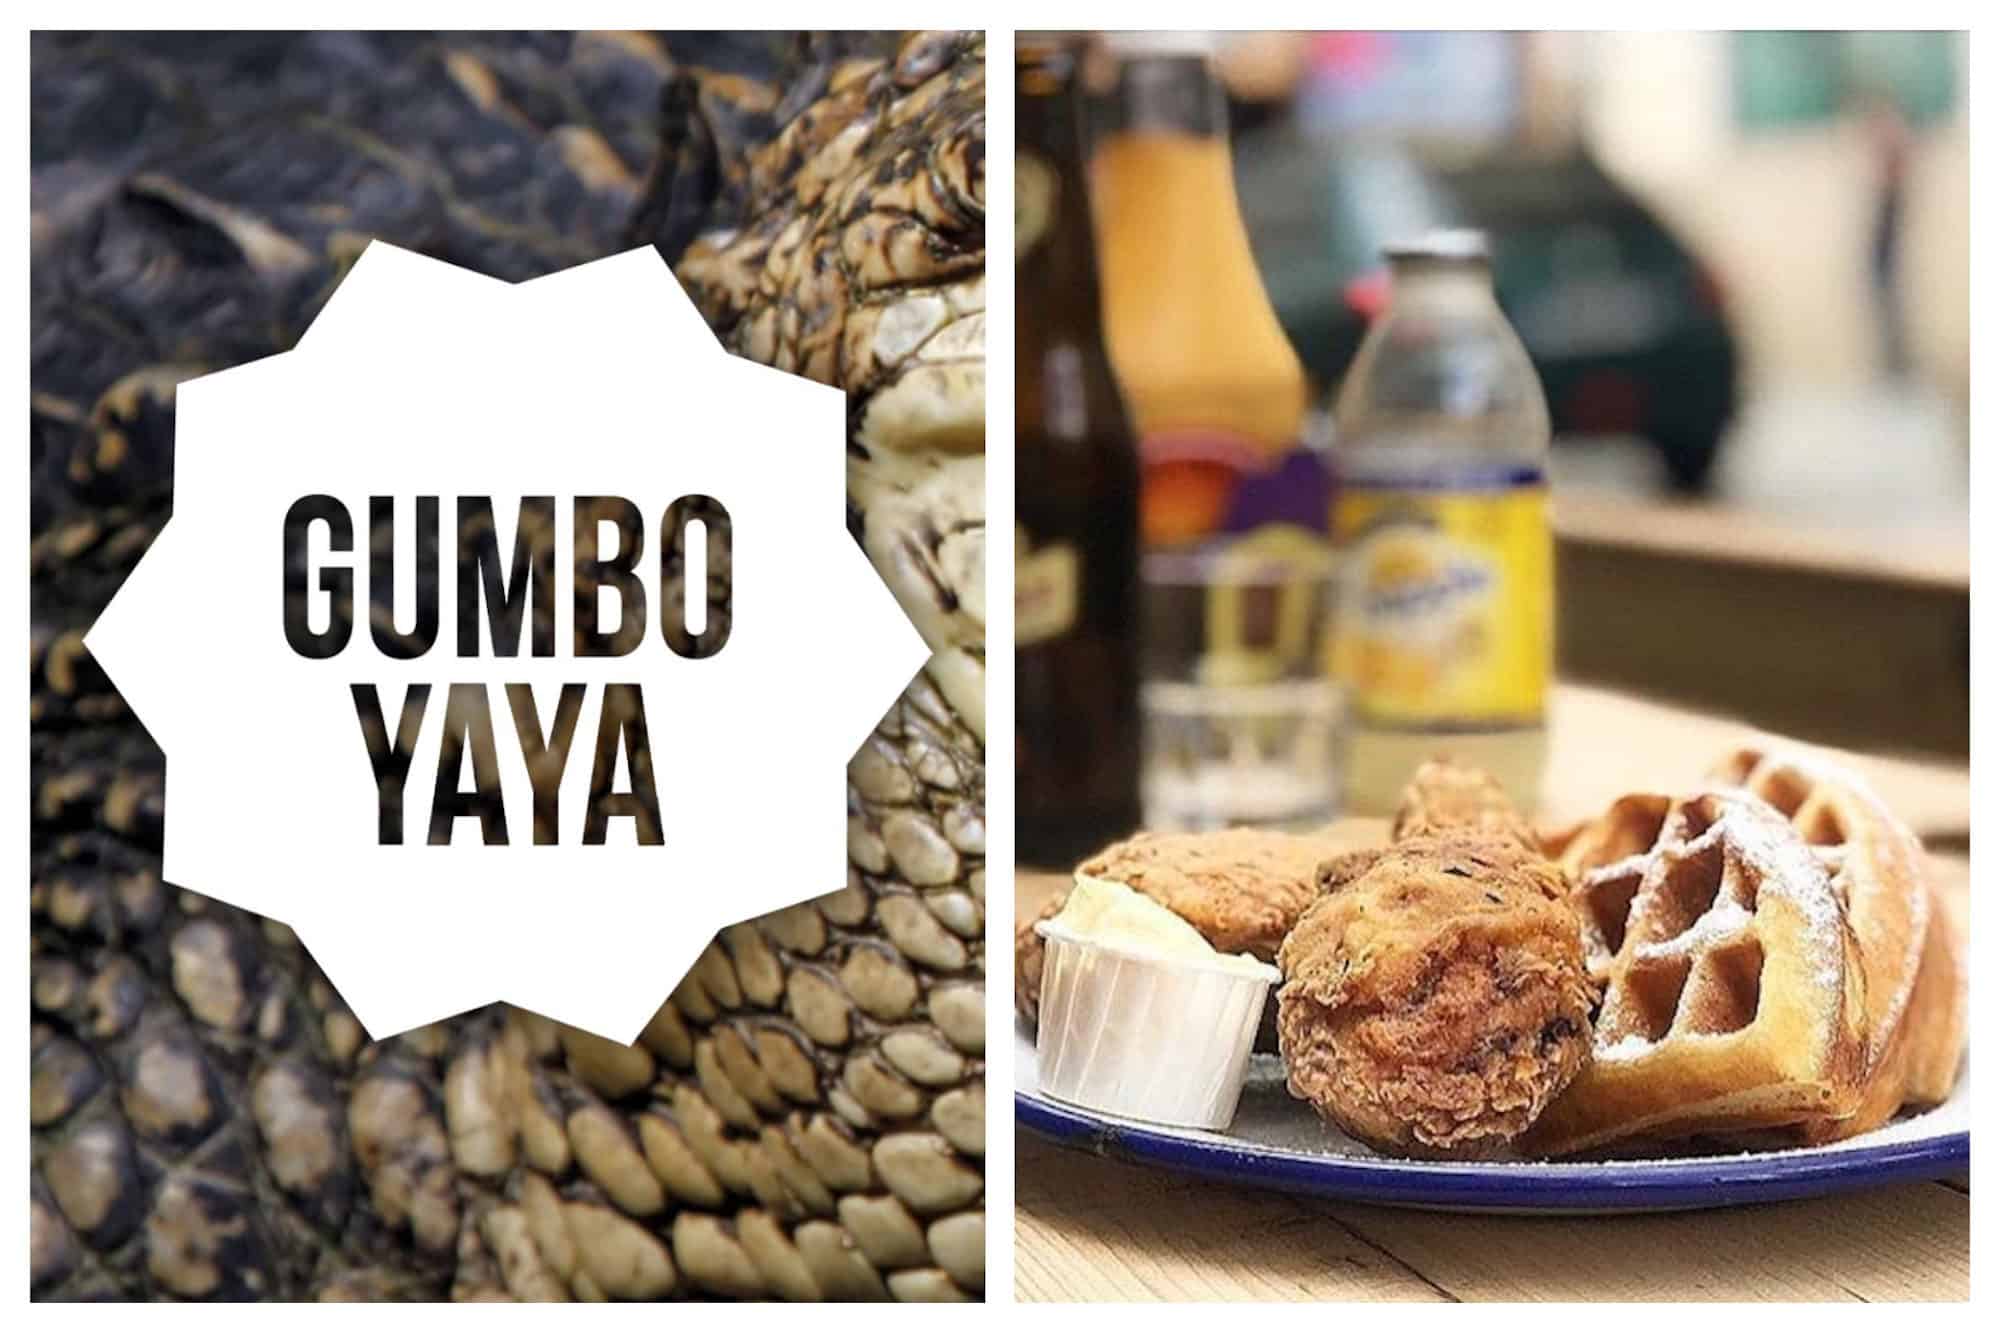 HiP Paris blog's favorite Paris restaurant for American comfort food is Gumbo Yaya for the fried chicken and waffles.